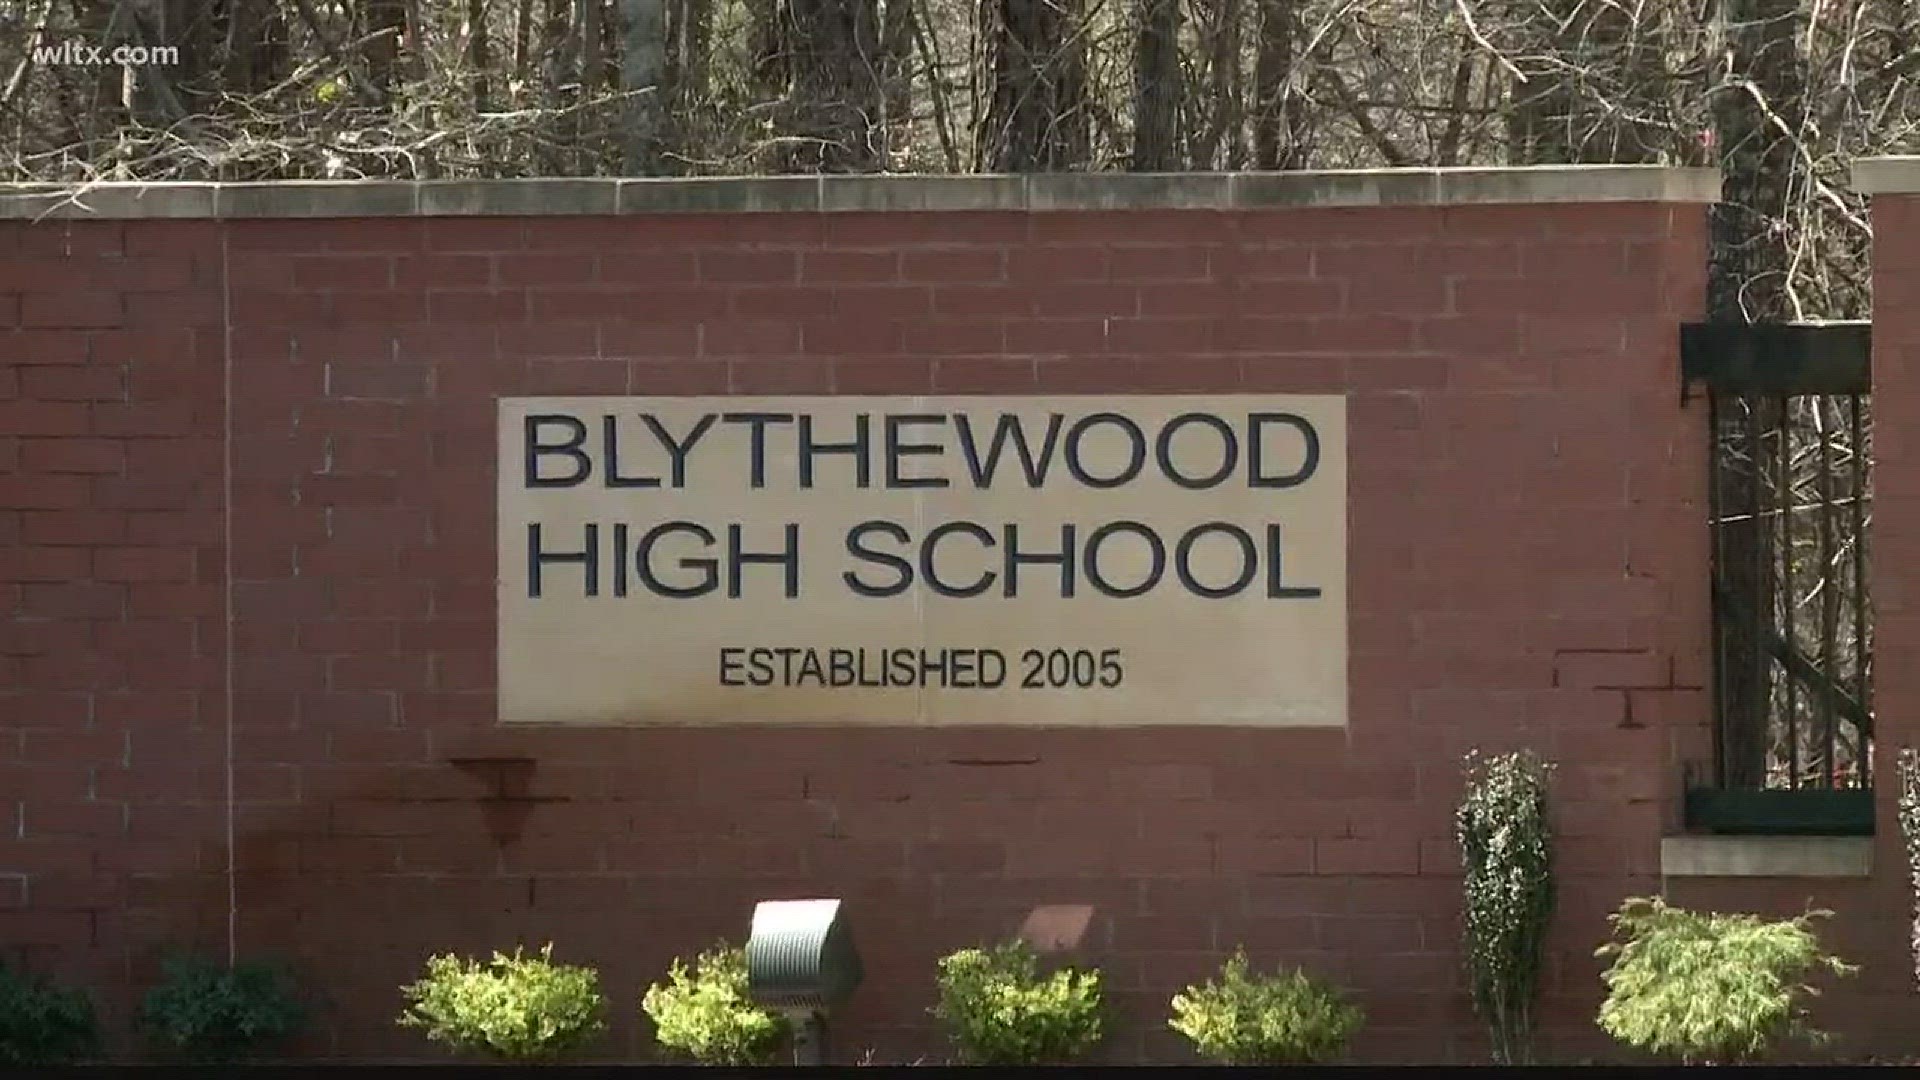 Deputies say the male student posted a video to Snapchat posing with a gun in the Blythewood High School parking lot.